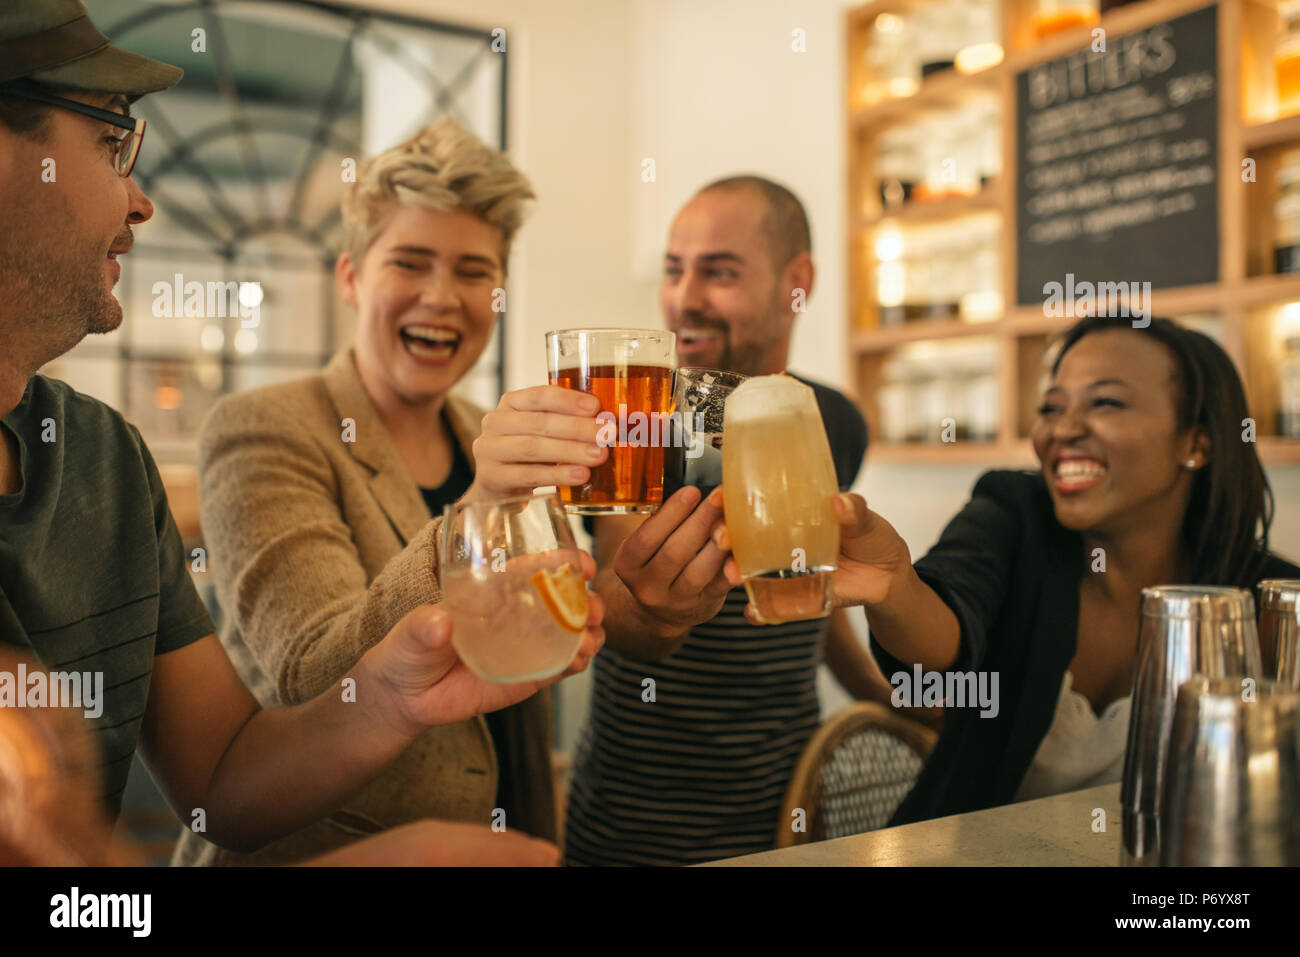 Friends hanging out together in a bar cheering with drinks  Stock Photo